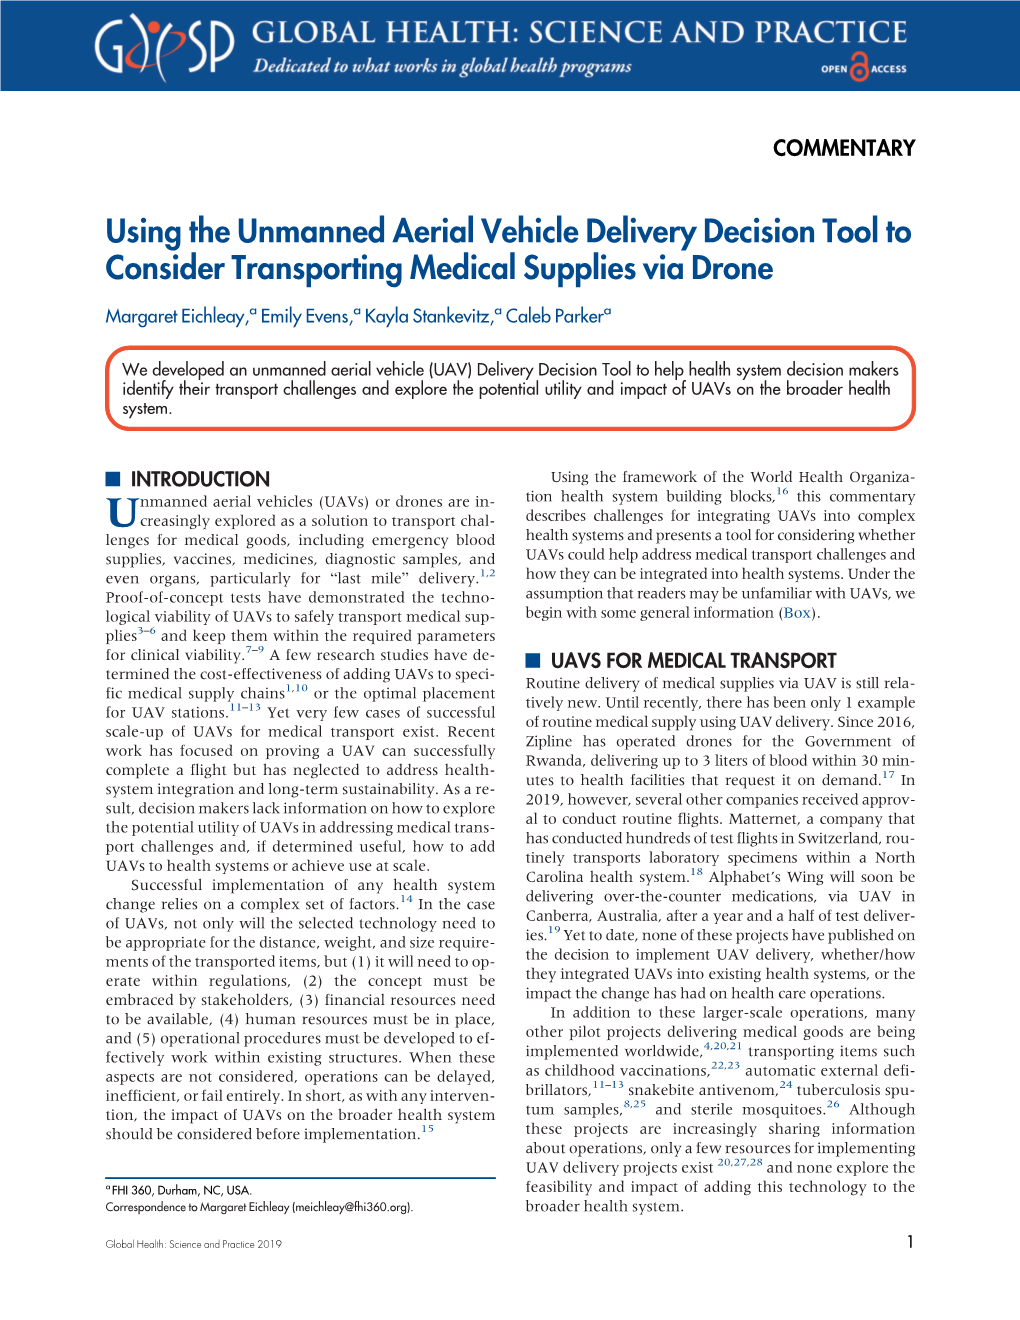 Using the Unmanned Aerial Vehicle Delivery Decision Tool to Consider Transporting Medical Supplies Via Drone